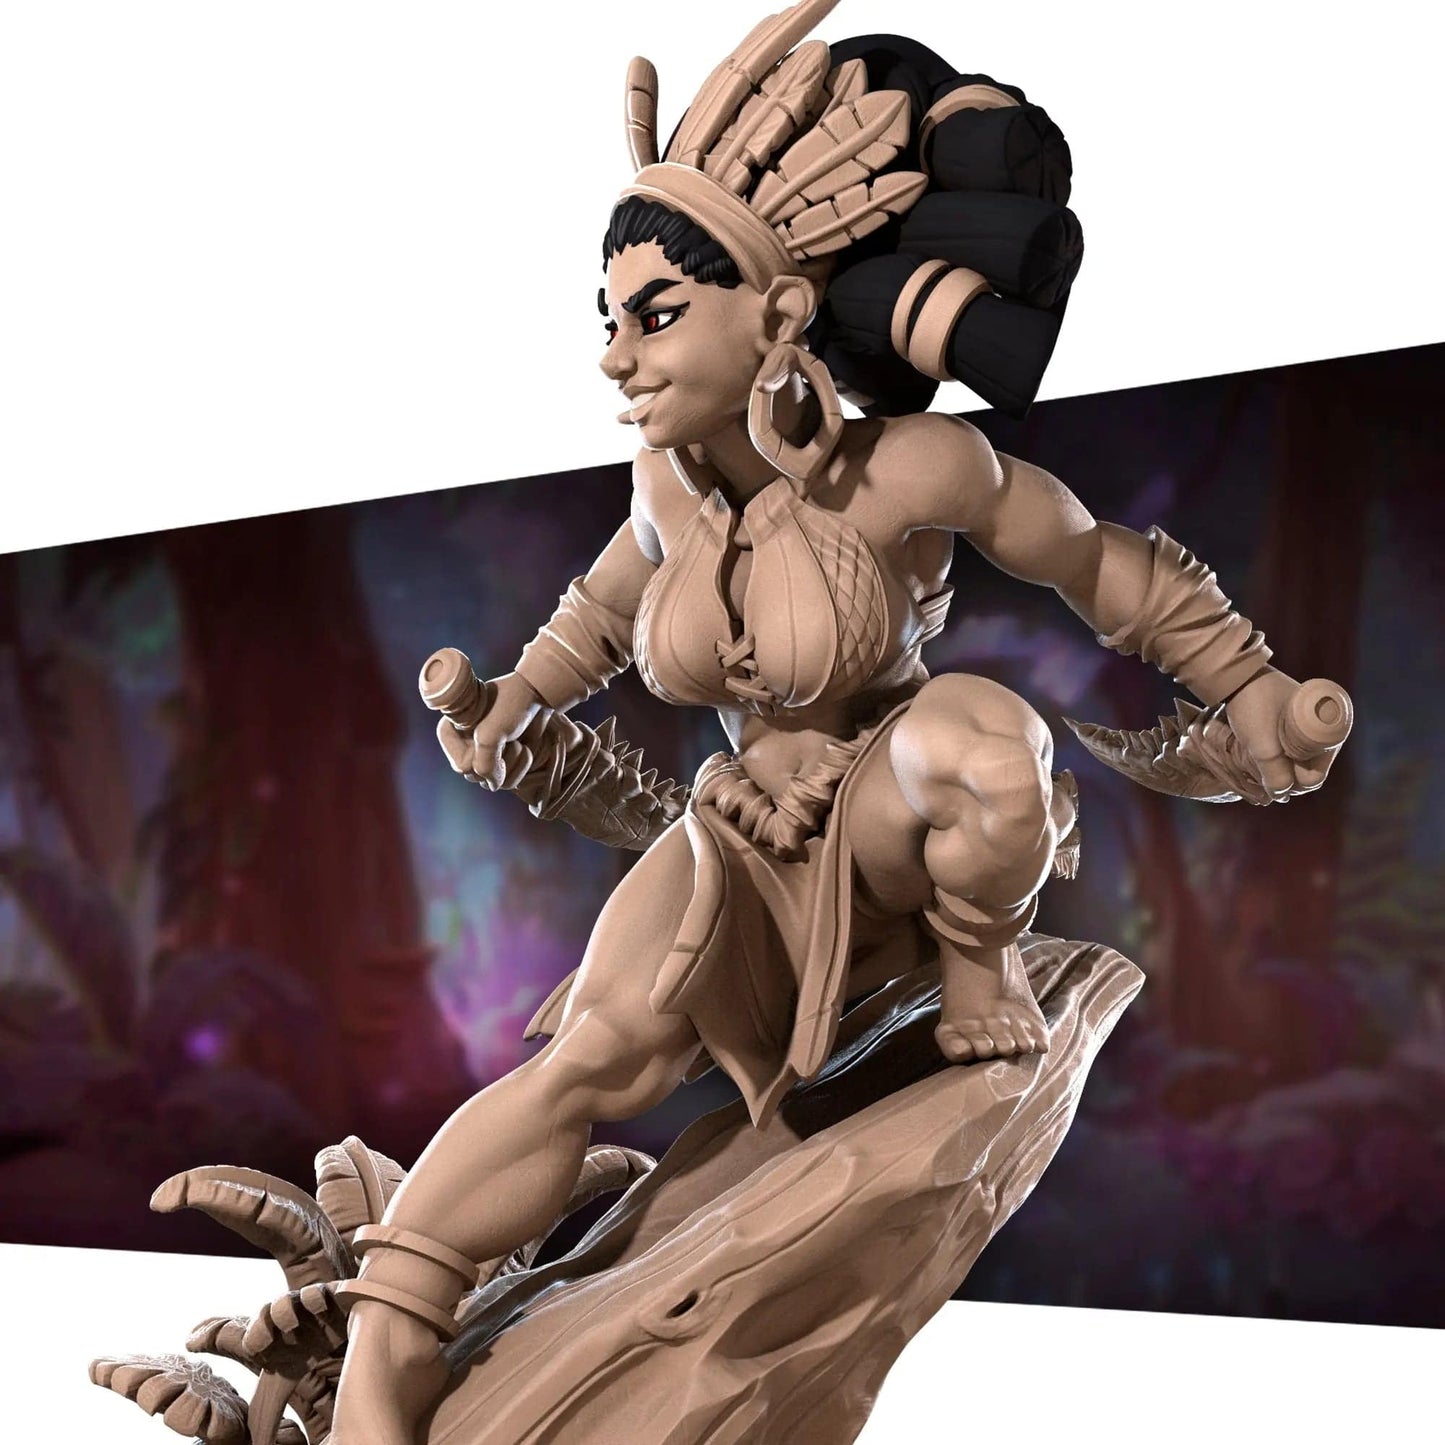 Kala, Pinup SFW NSFW Lovely Woman, Amazon on Rock | D&D Miniature Pinup | Bite the Bullet - Tattles Told 3D